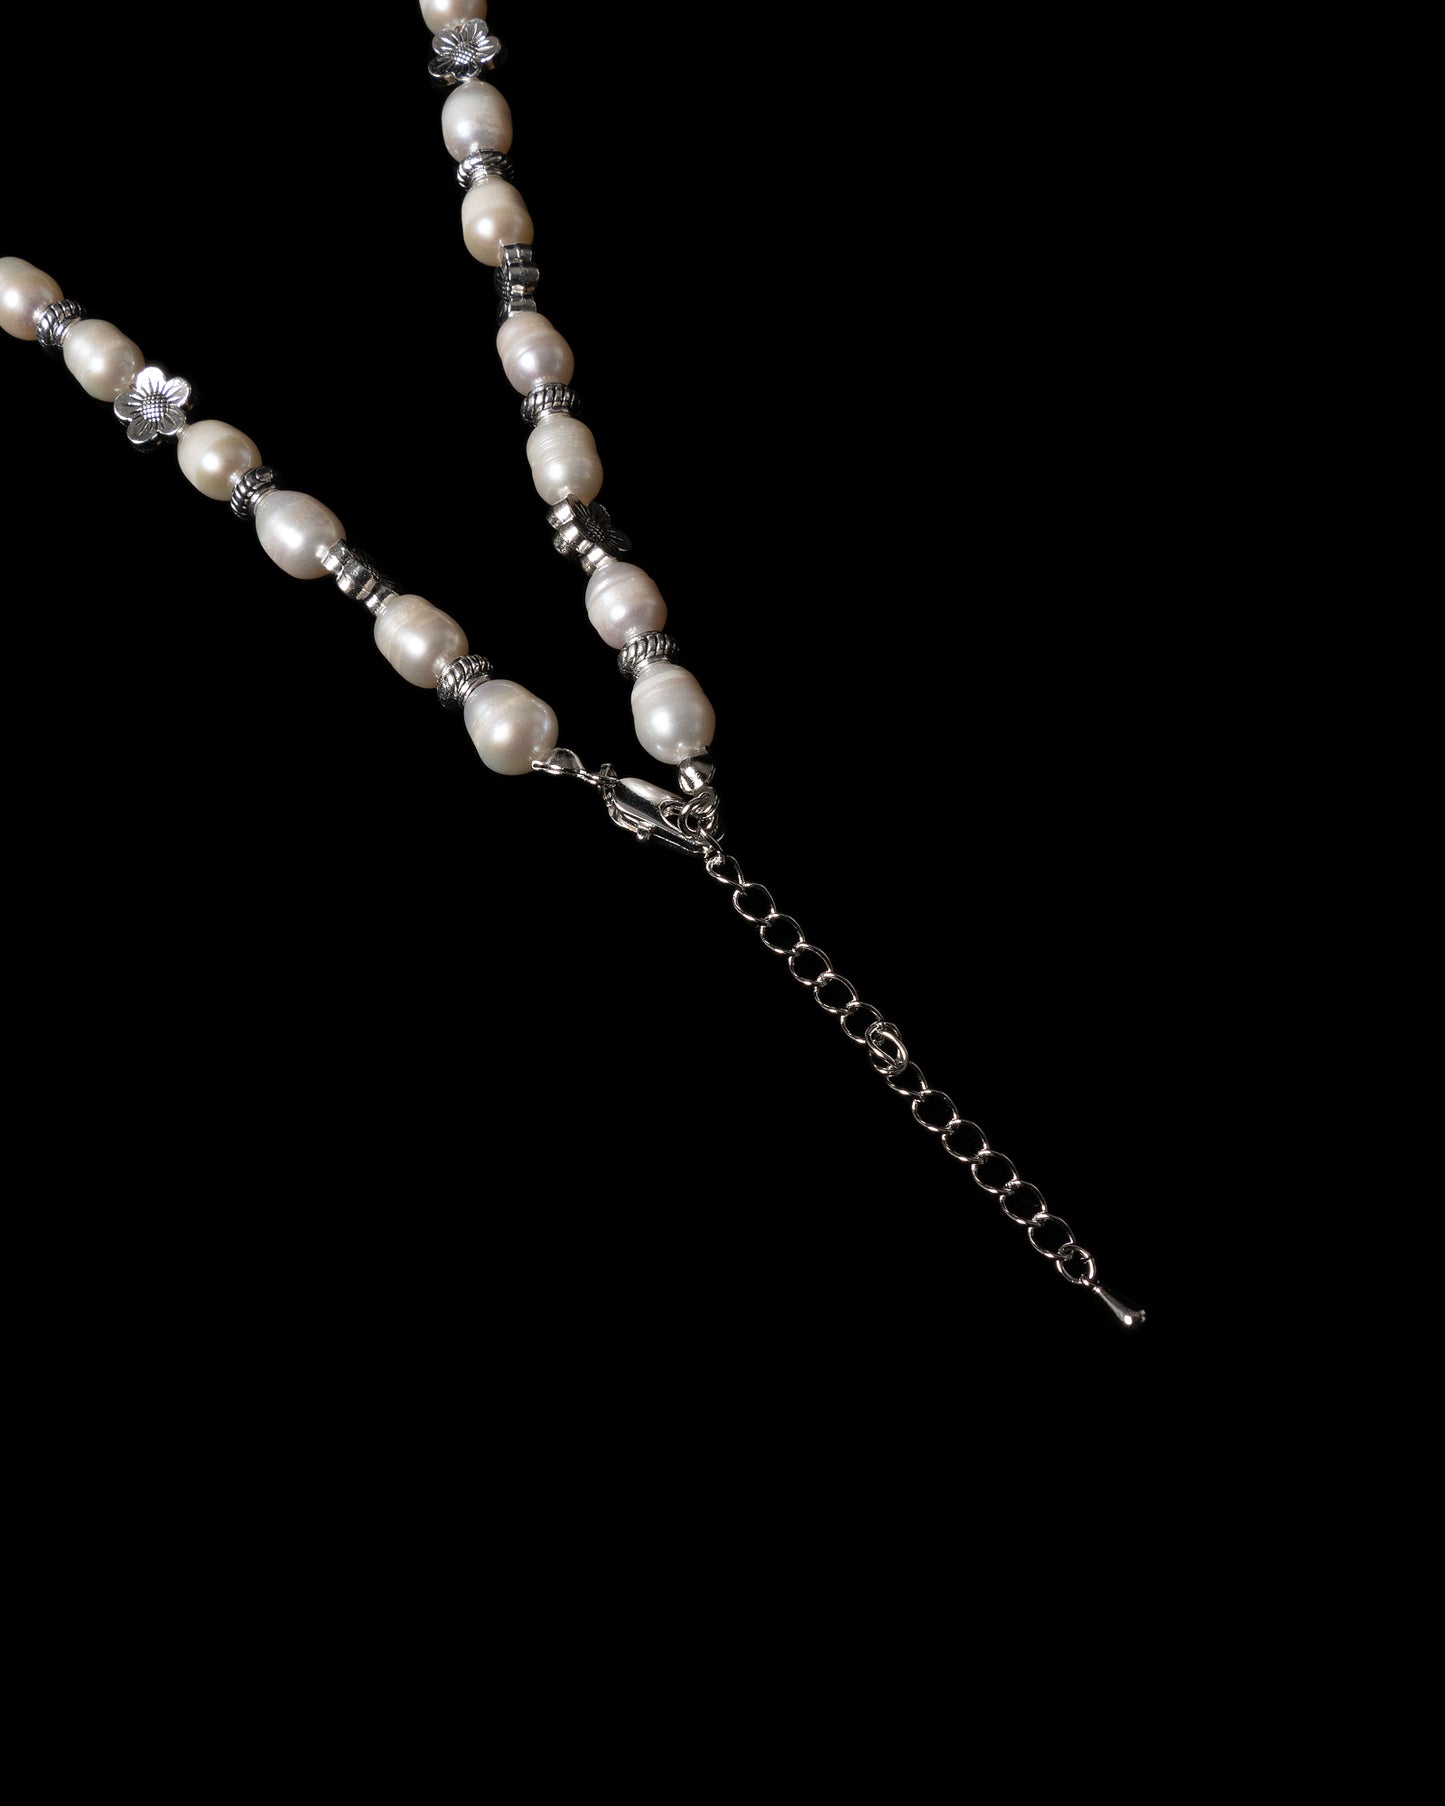 Family crest pearl necklace